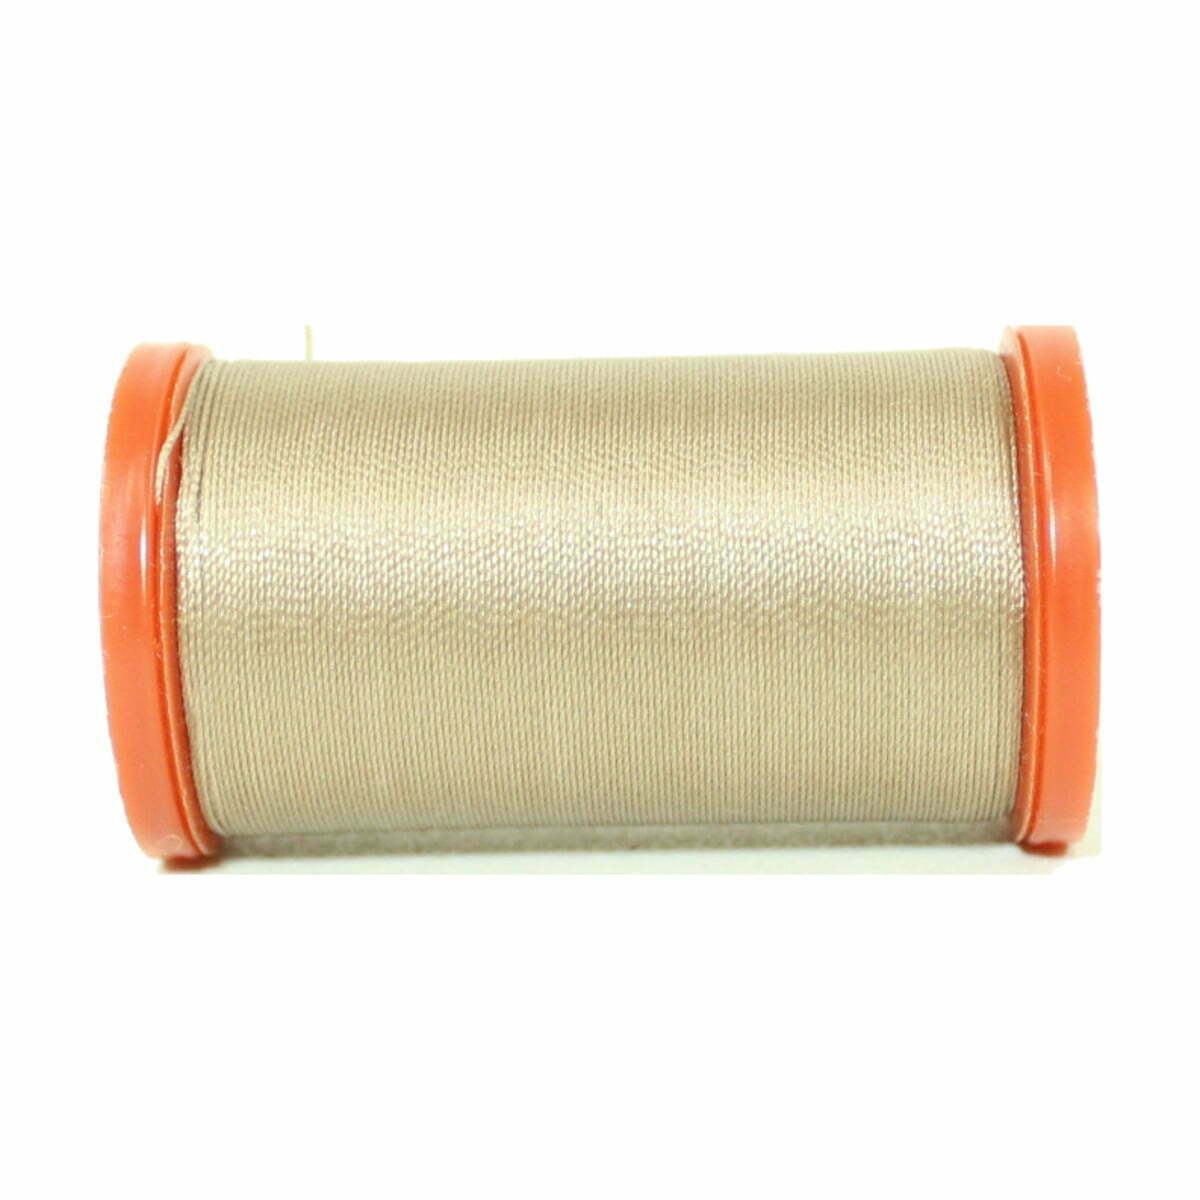 Coats Extra Strong Upholstery Thread 150Yd-Driftwood